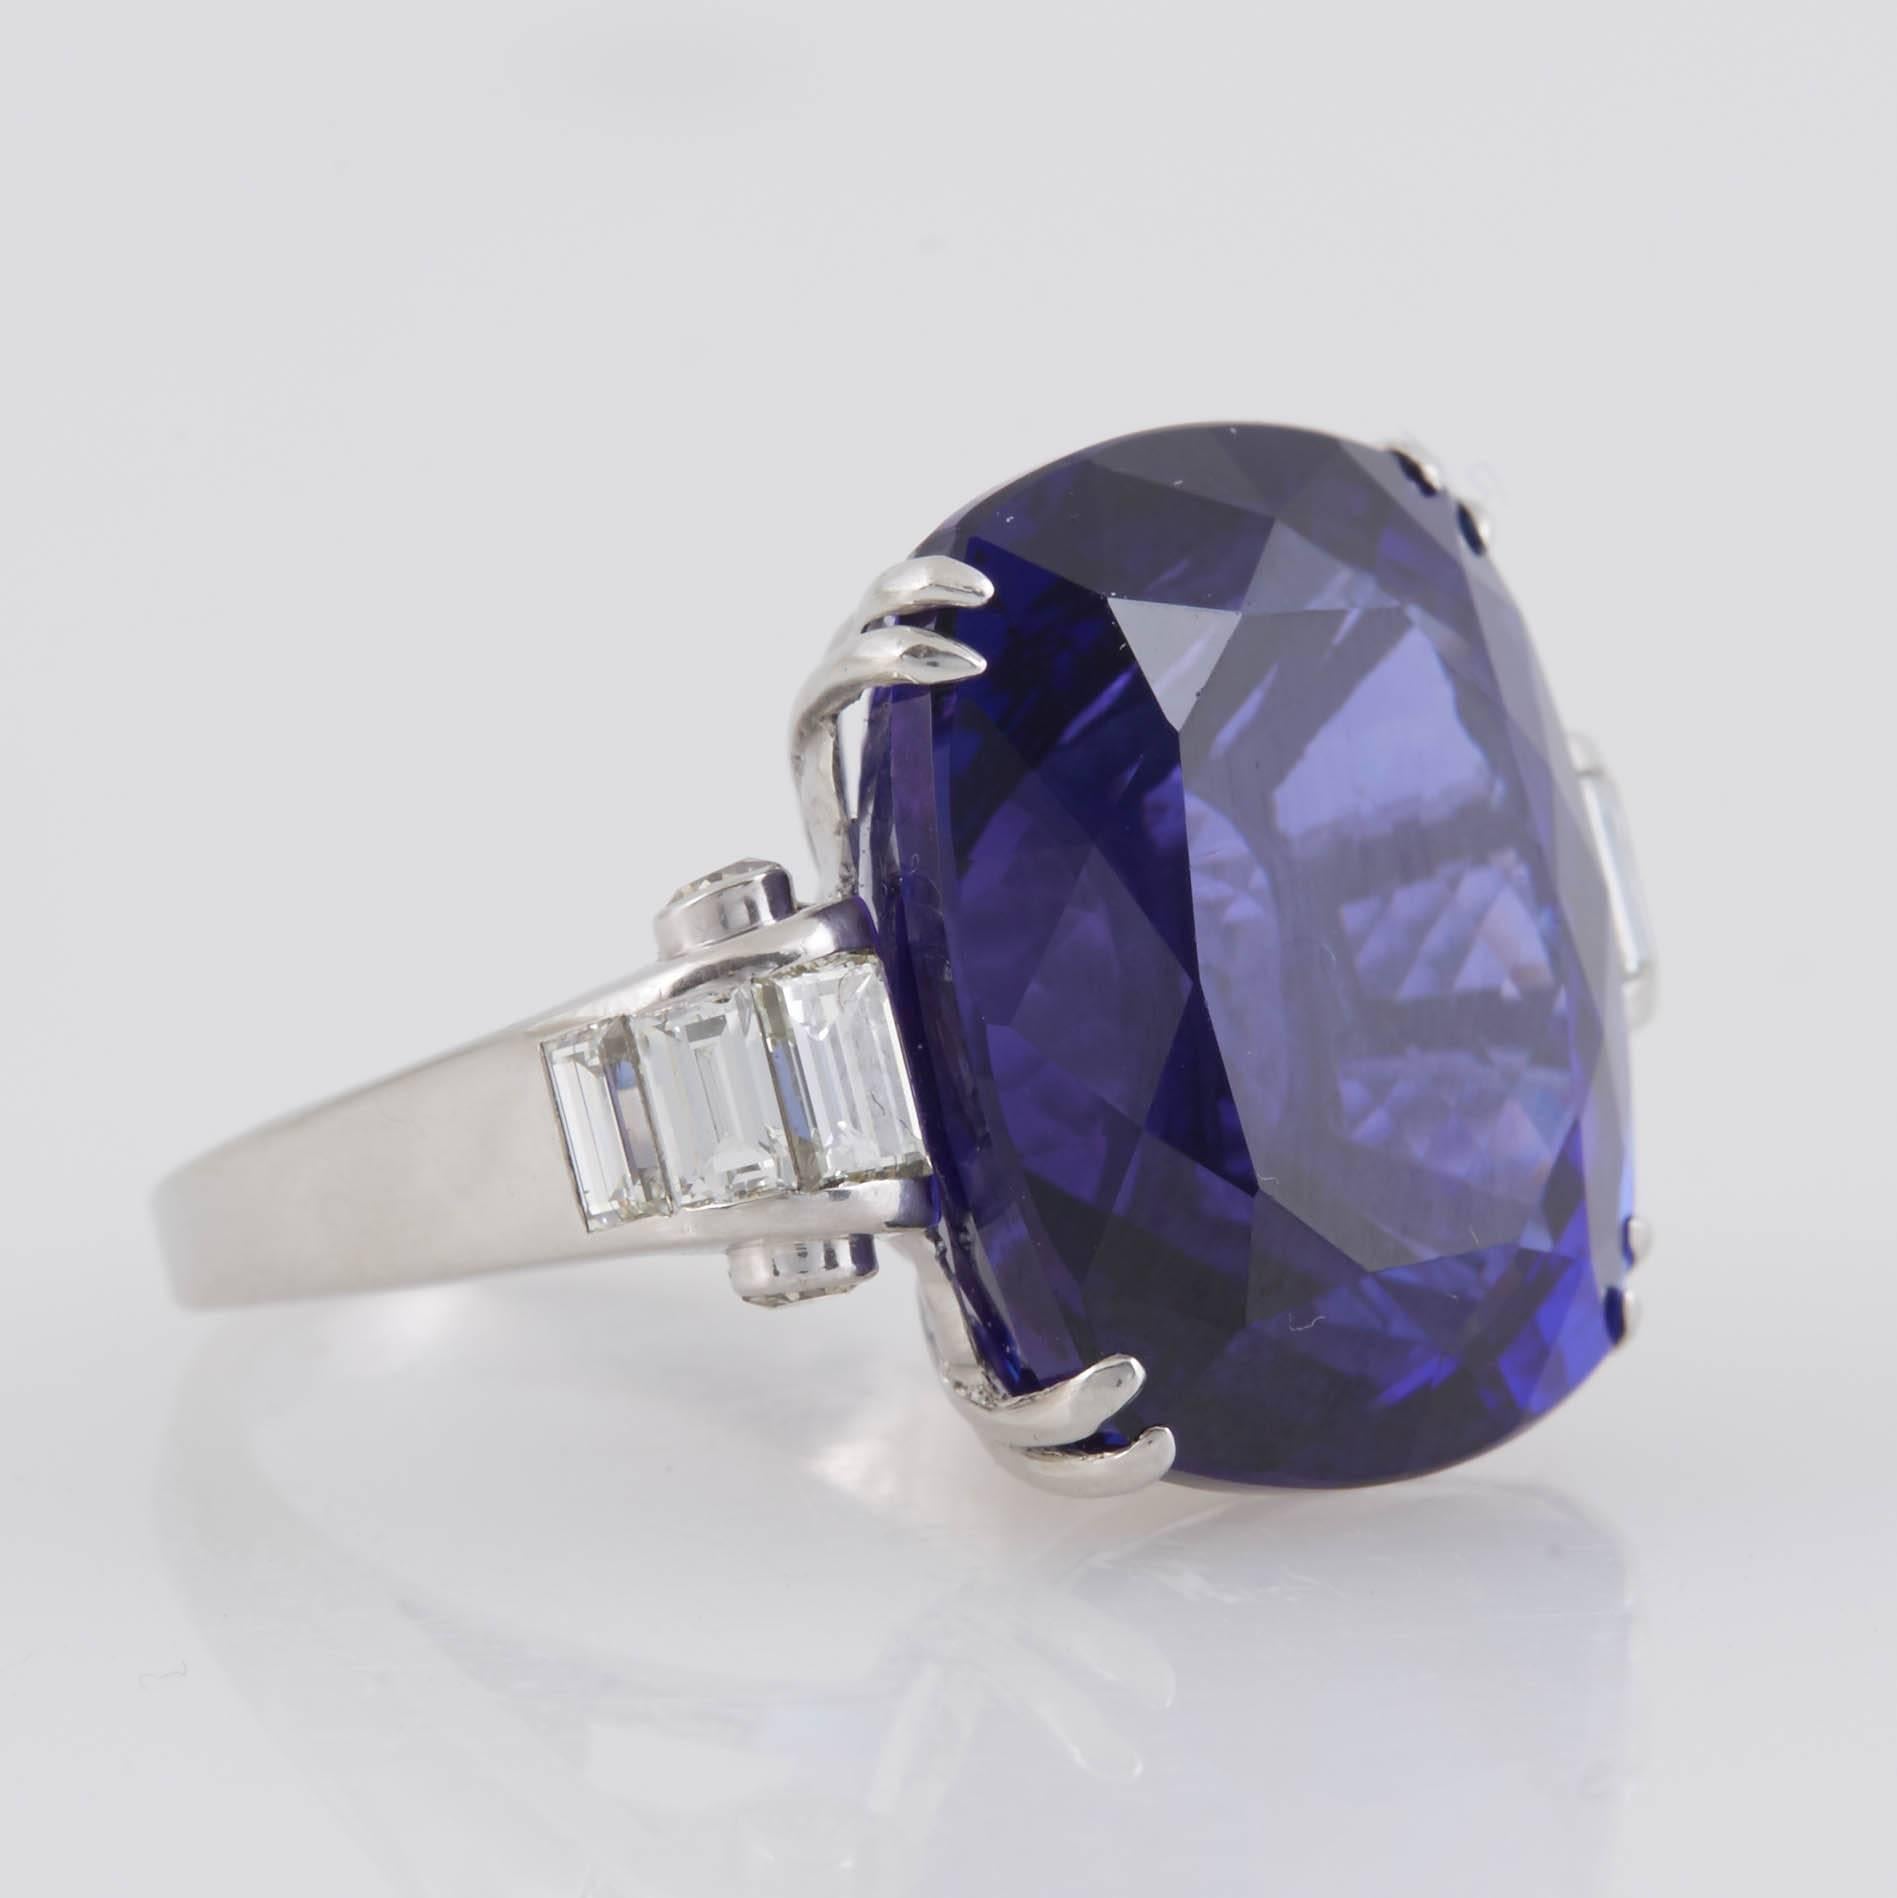 This gorgeous 34 carat cushion cut Tanzanite is set in a beautiful mounting, finely crafted in platinum, with baguette cut diamonds on each side.
